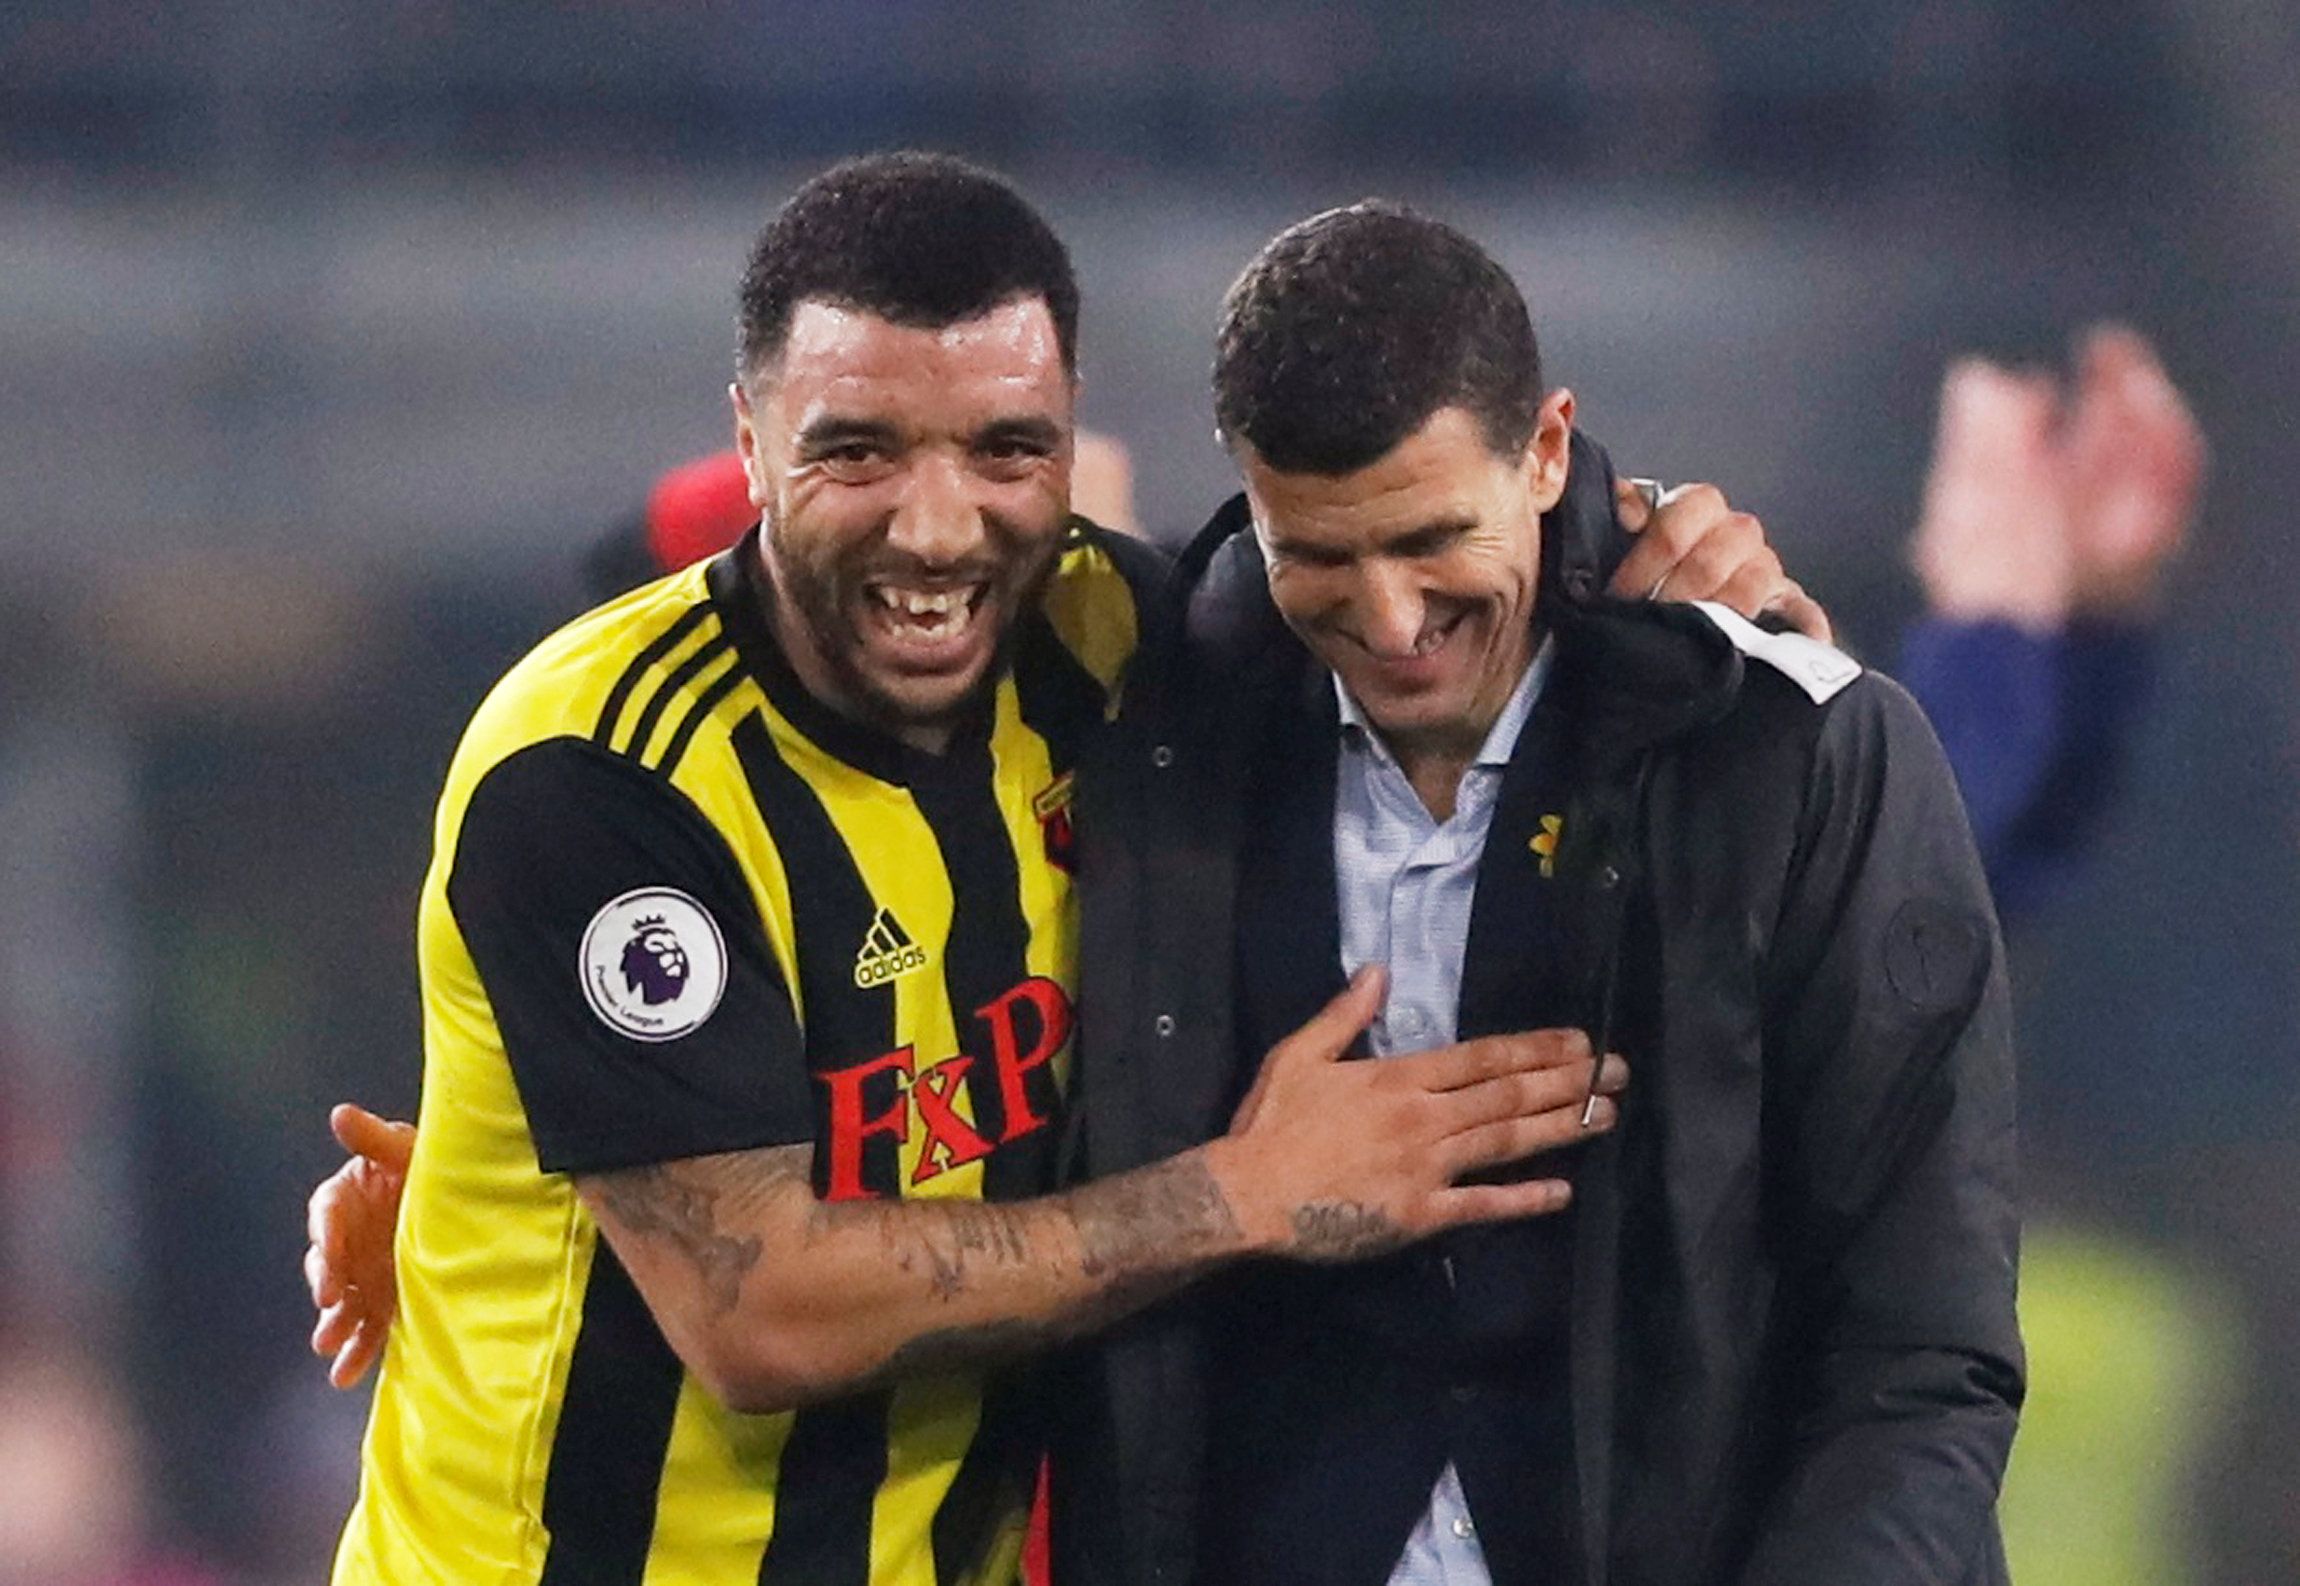 Soccer Football - Premier League - Cardiff City v Watford - Cardiff City Stadium, Cardiff, Britain - February 22, 2019  Watford's Troy Deeney celebrates after the match with Watford manager Javi Gracia   Action Images via Reuters/Matthew Childs  EDITORIAL USE ONLY. No use with unauthorized audio, video, data, fixture lists, club/league logos or 